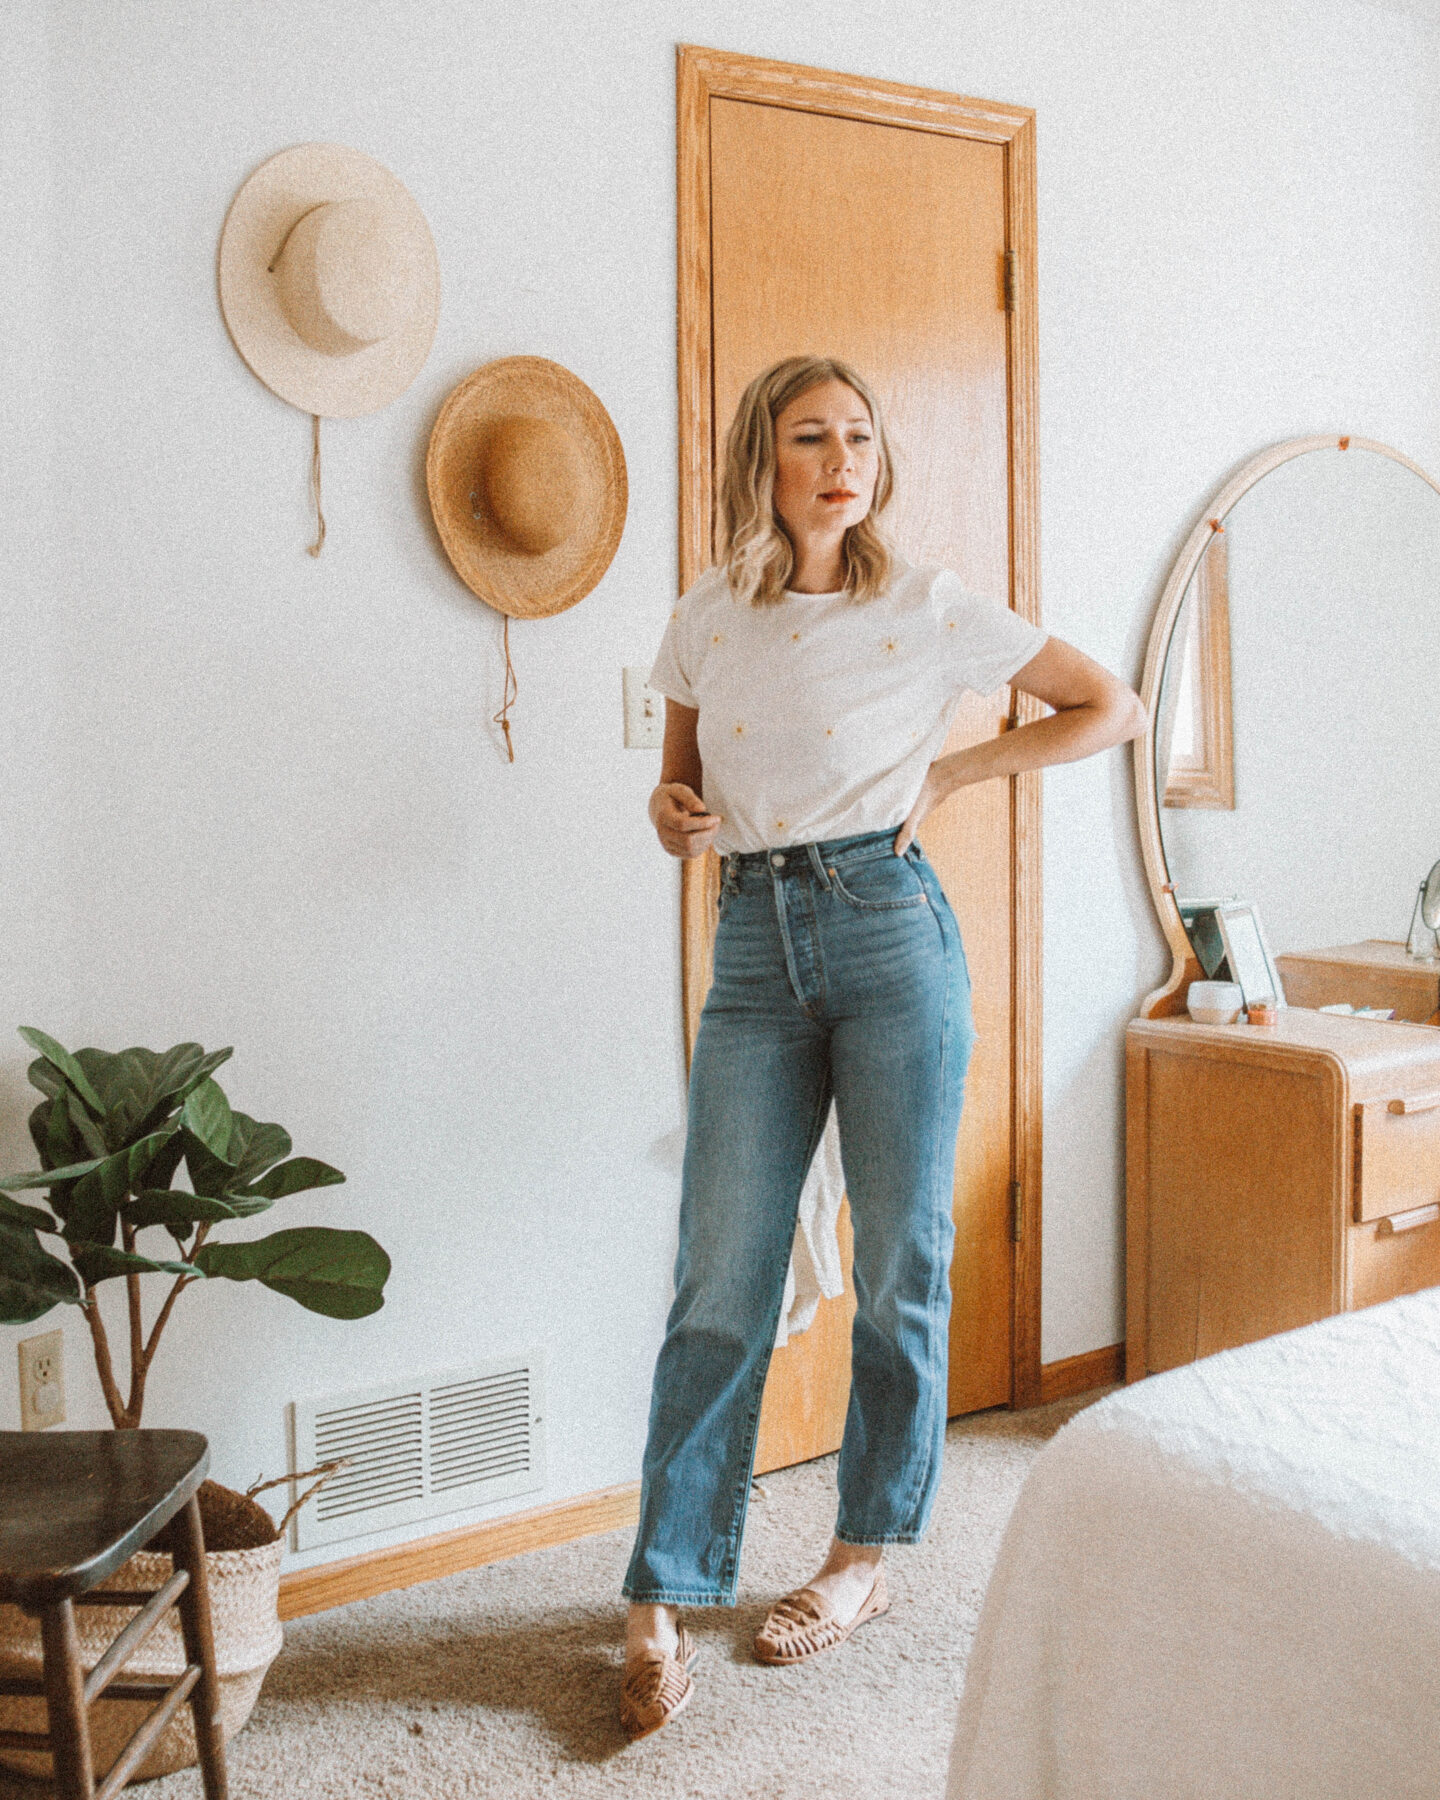 A Week of Outfits: Casual, Stylish Outfits for Real Life, embroidered tee, levi's mile high jeans, nisolo huarache sandals, pyne & smith model no. 26